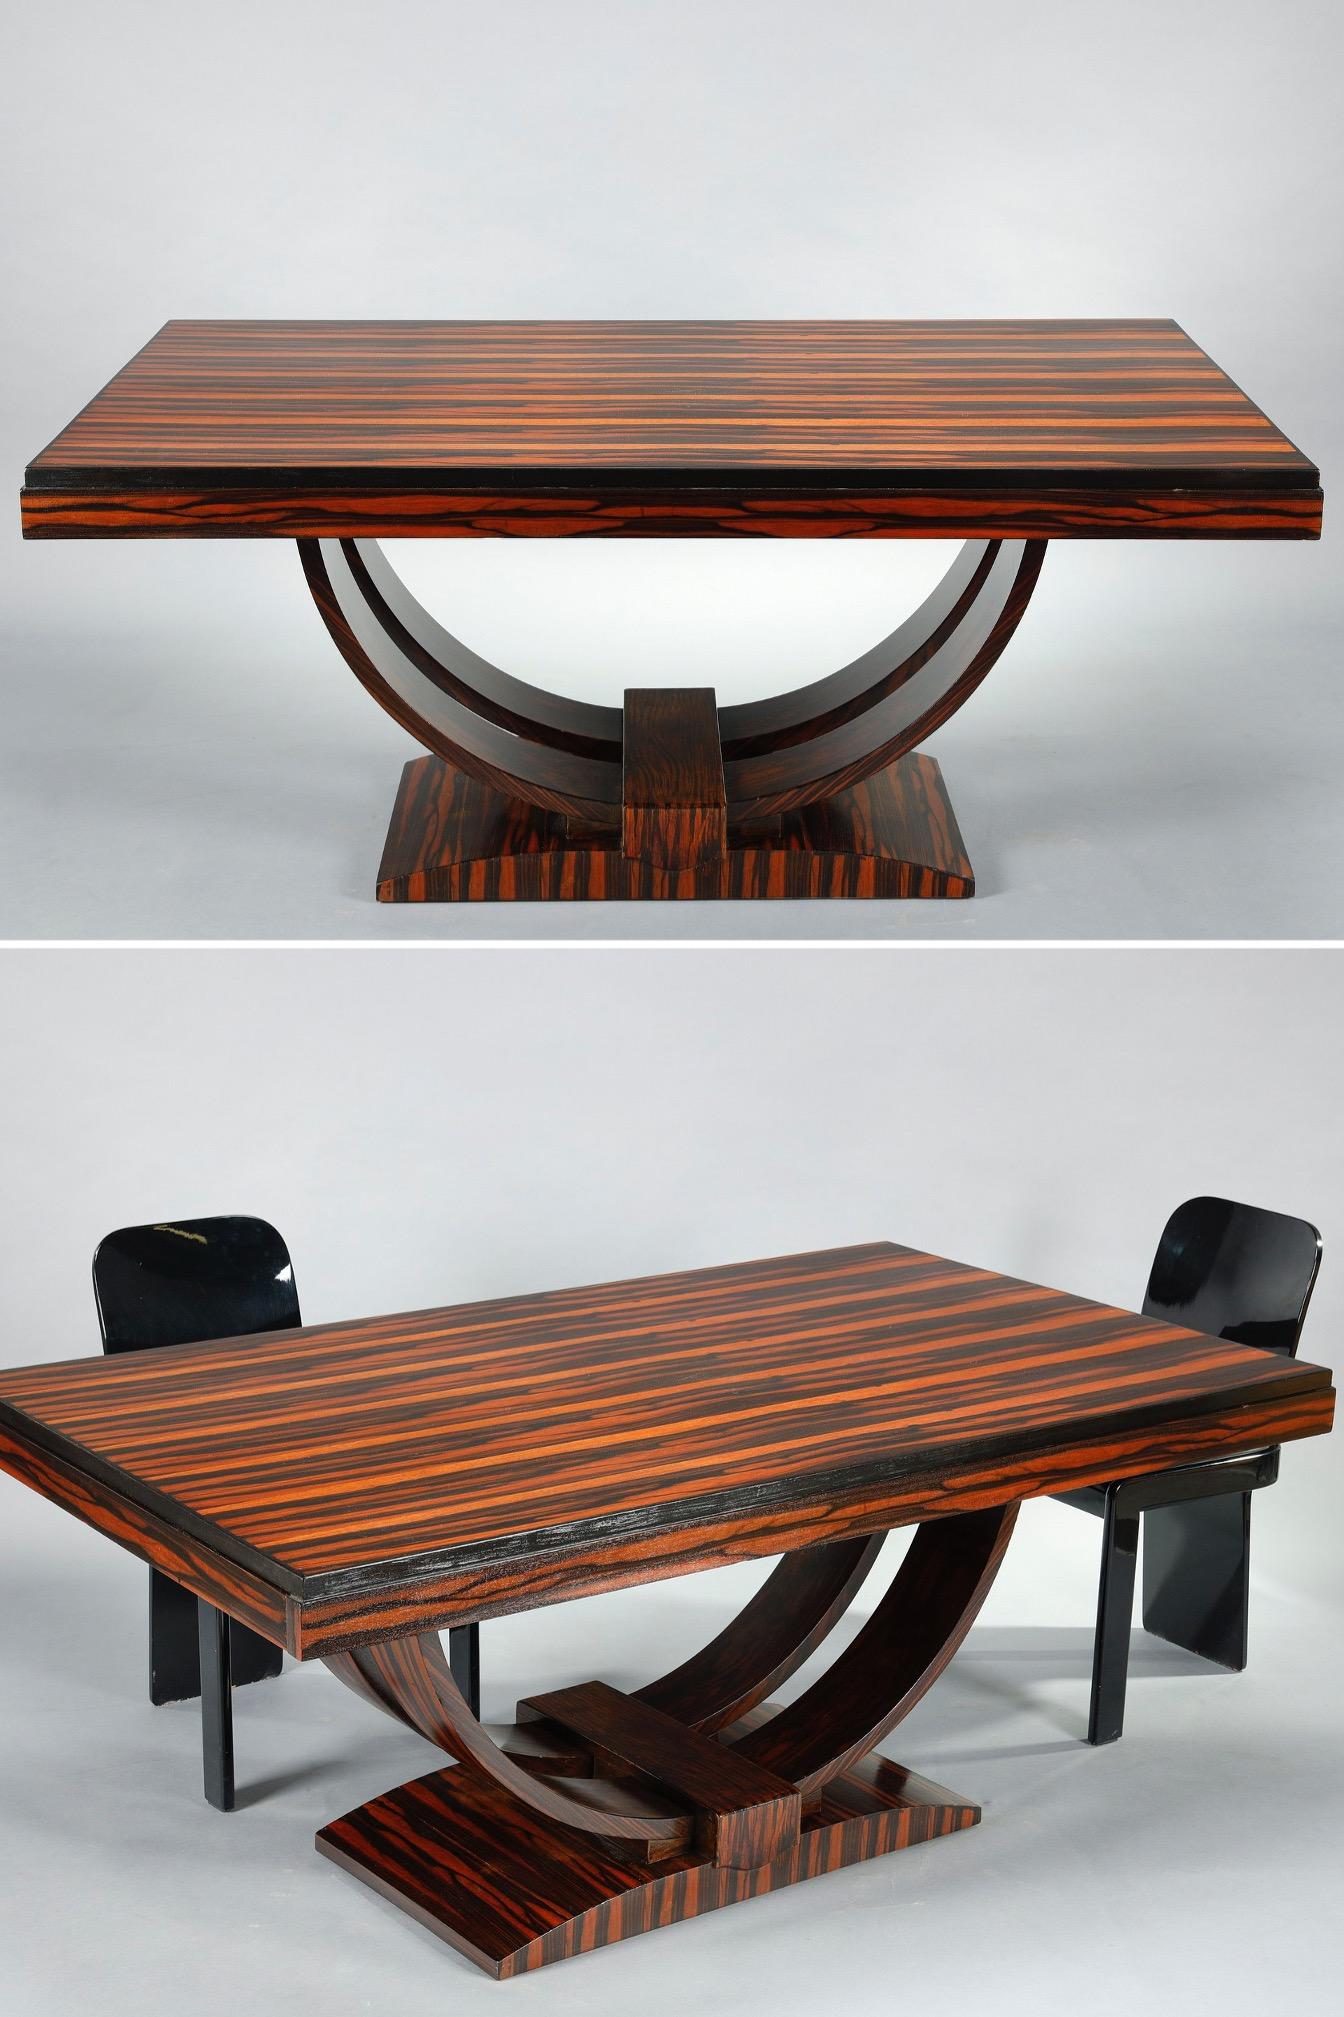 Rectangular Art Deco dining table in Macassar ebony veneer, resting on a double curved pedestal and opening to two side drawers. The elegance, sobriety and nobility of materials are typical of the period.